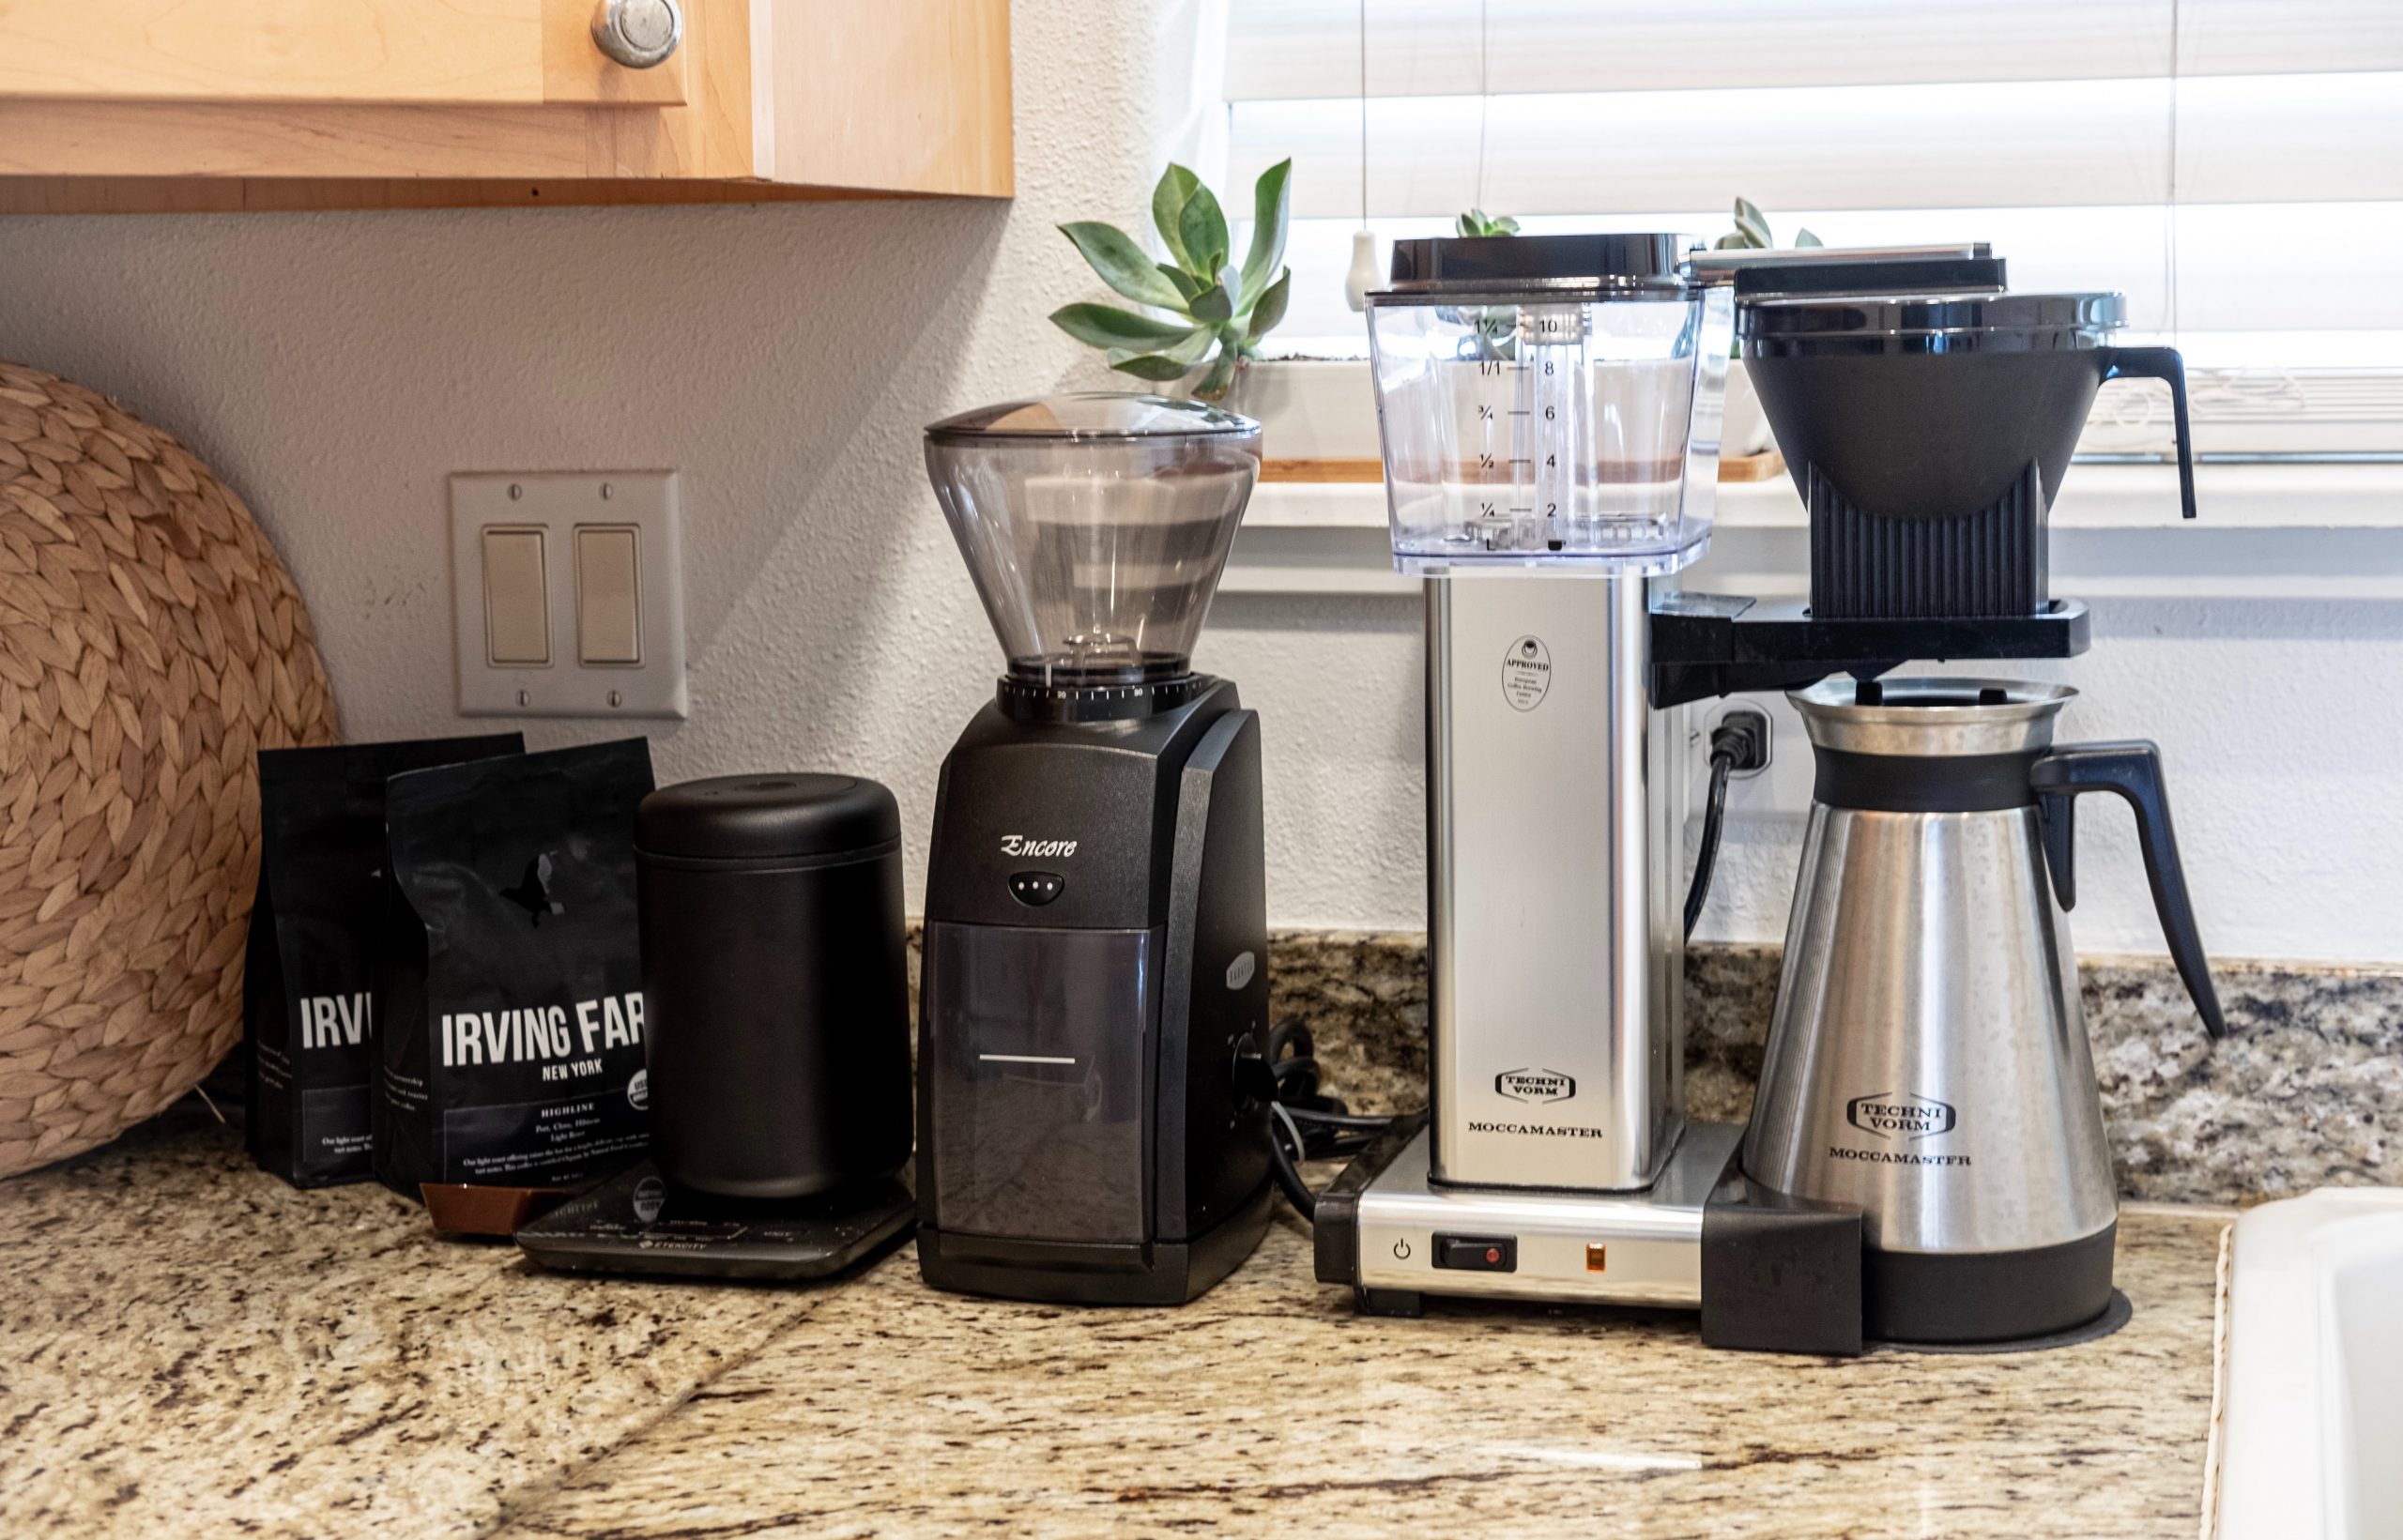 Close up of several small kitchen appliances arranged on a kitchen counter.